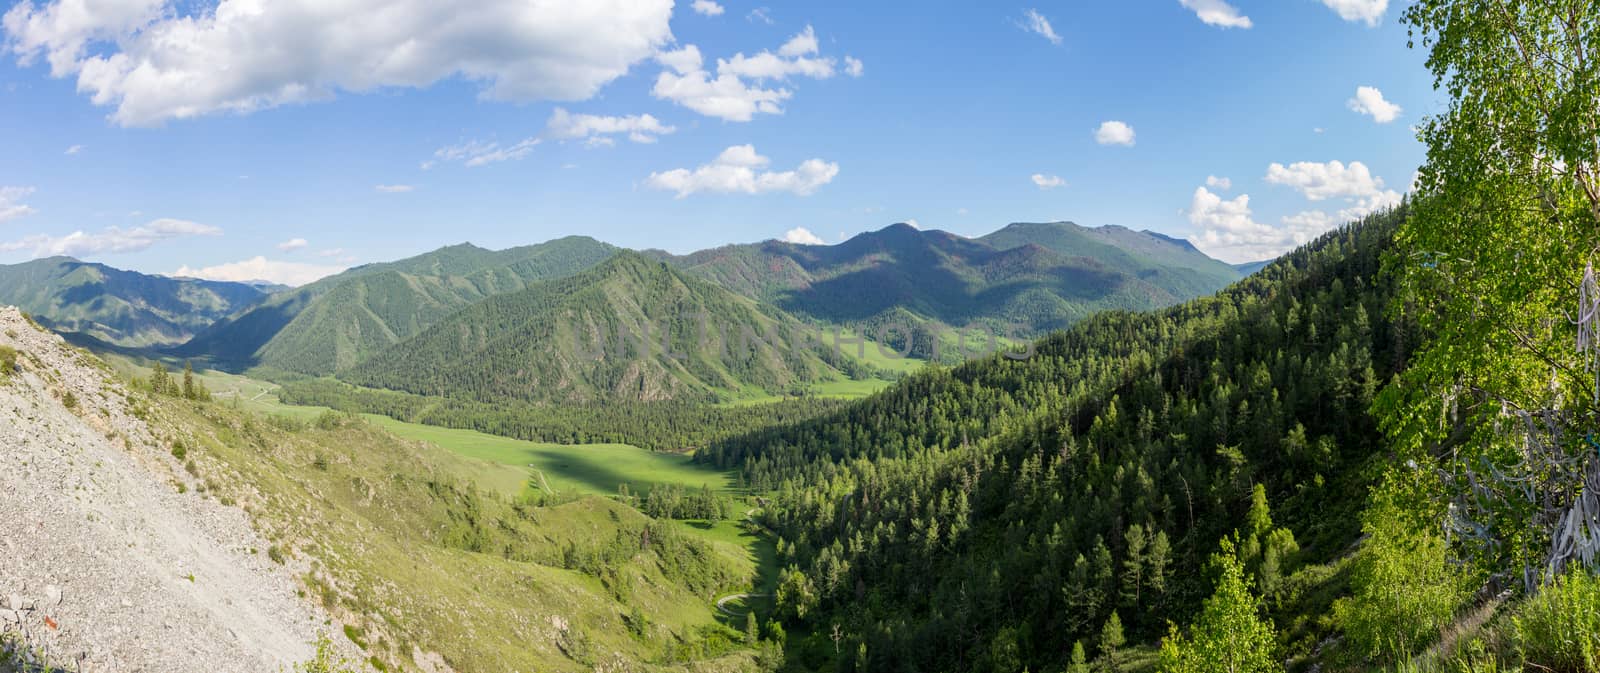 Summer view of mountain valley, under blue sky with clouds. Western Siberia, Altai mountains